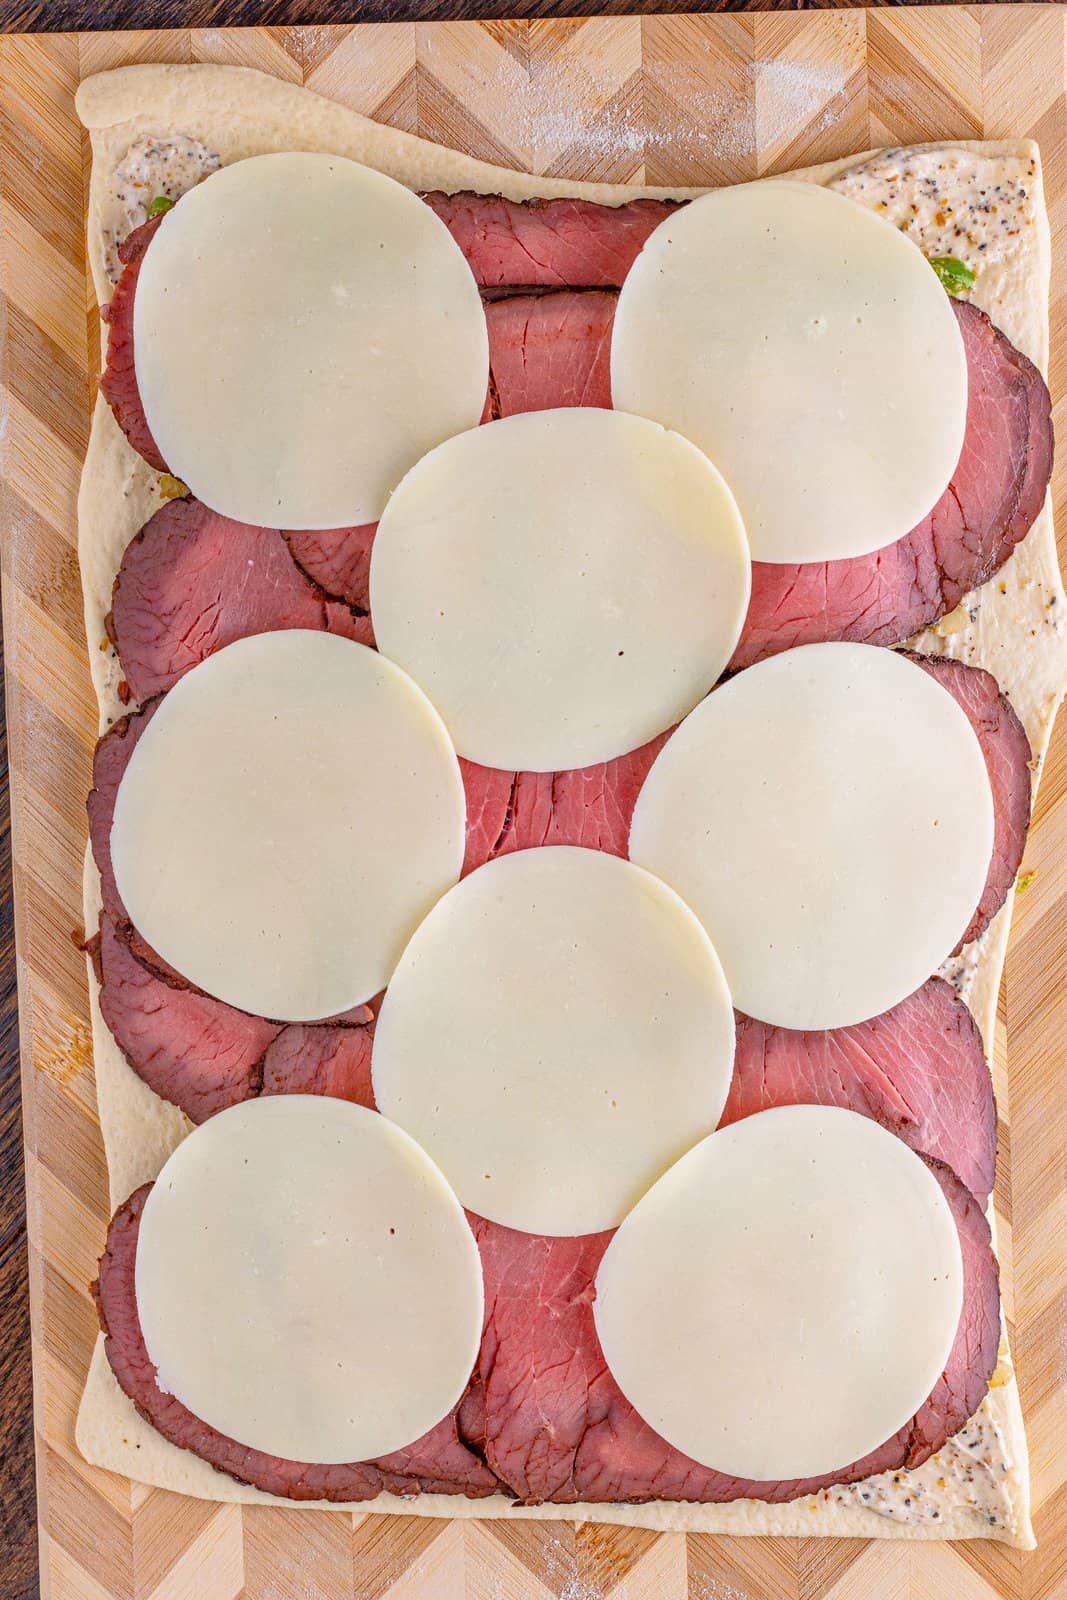 slices of provolone layered across sliced roast beef.